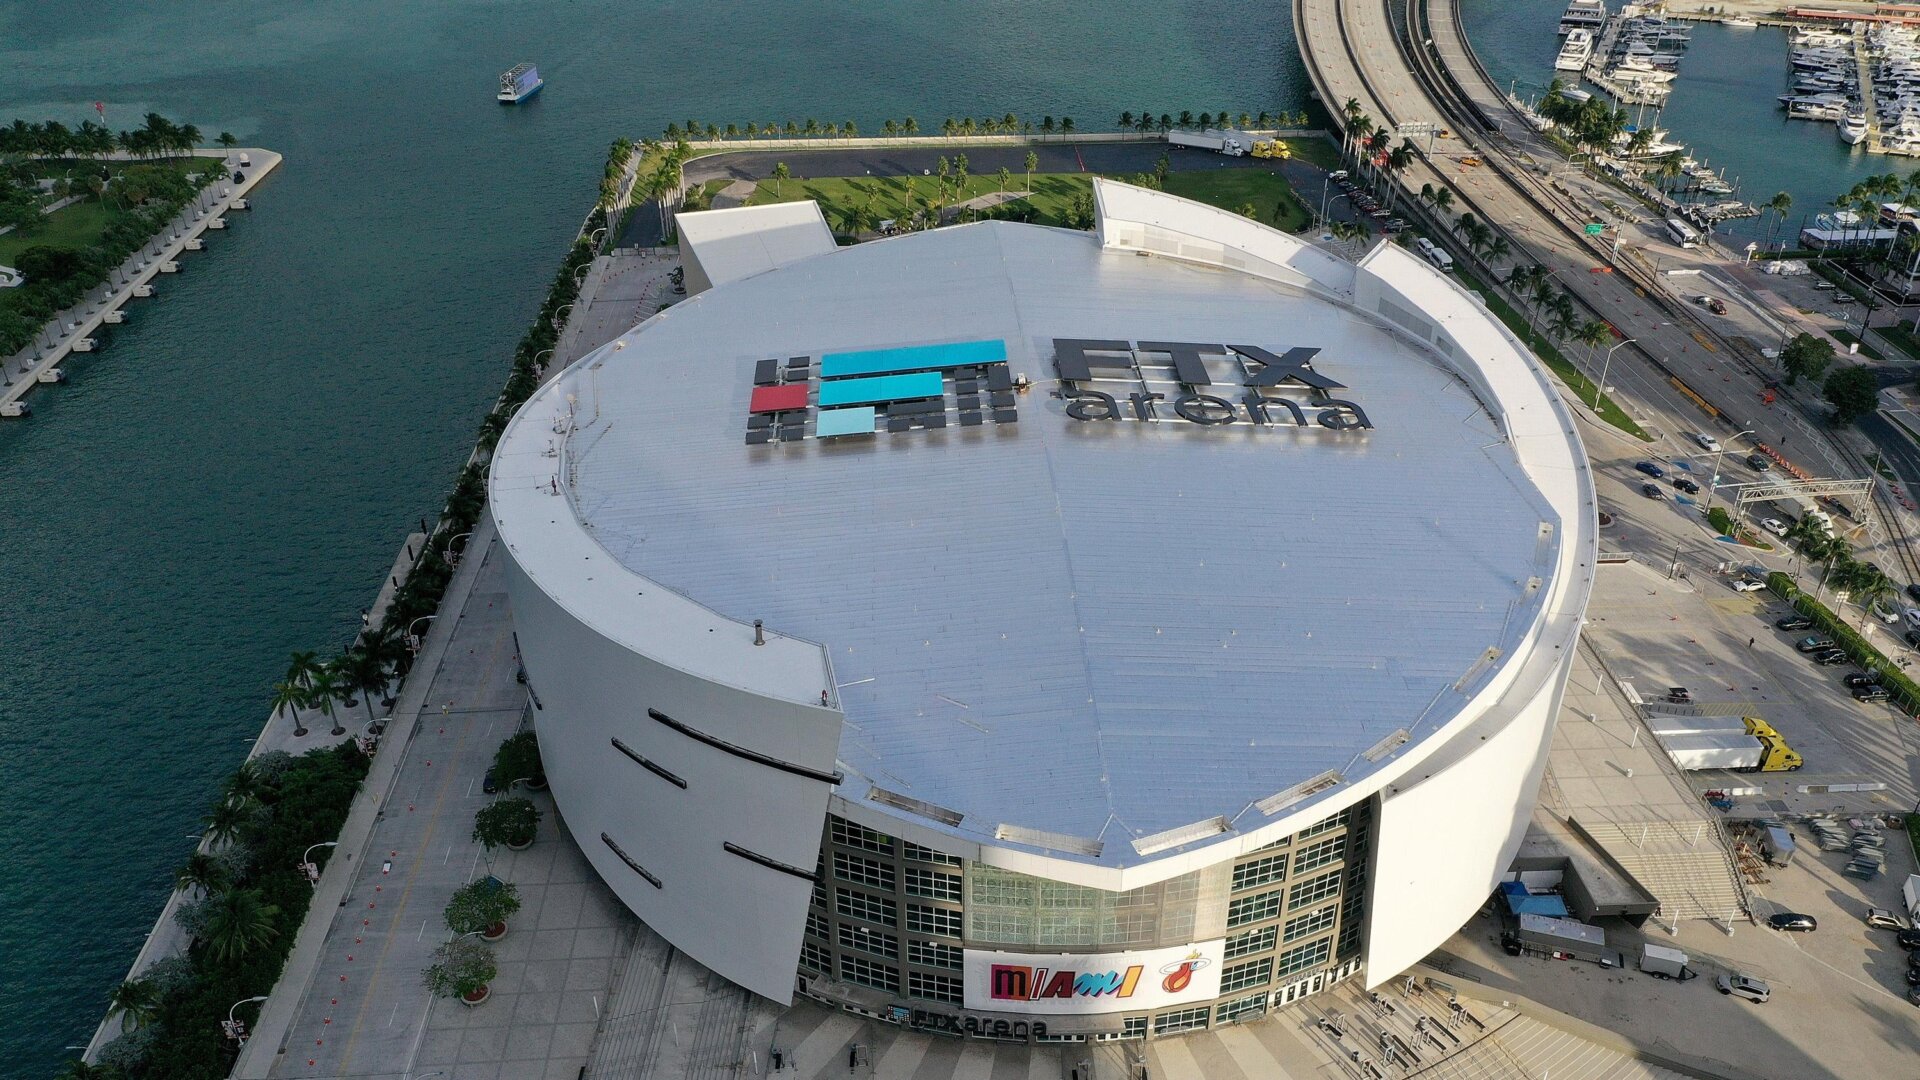 The FTX creditor list also named the Miami-based Basketball Properties LTD as a creditor. FTX bought the rights to the home of the Miami Heat’s home arena for $135 million in 2021. The Miami-Dade County government has since terminated that 19-year contract.